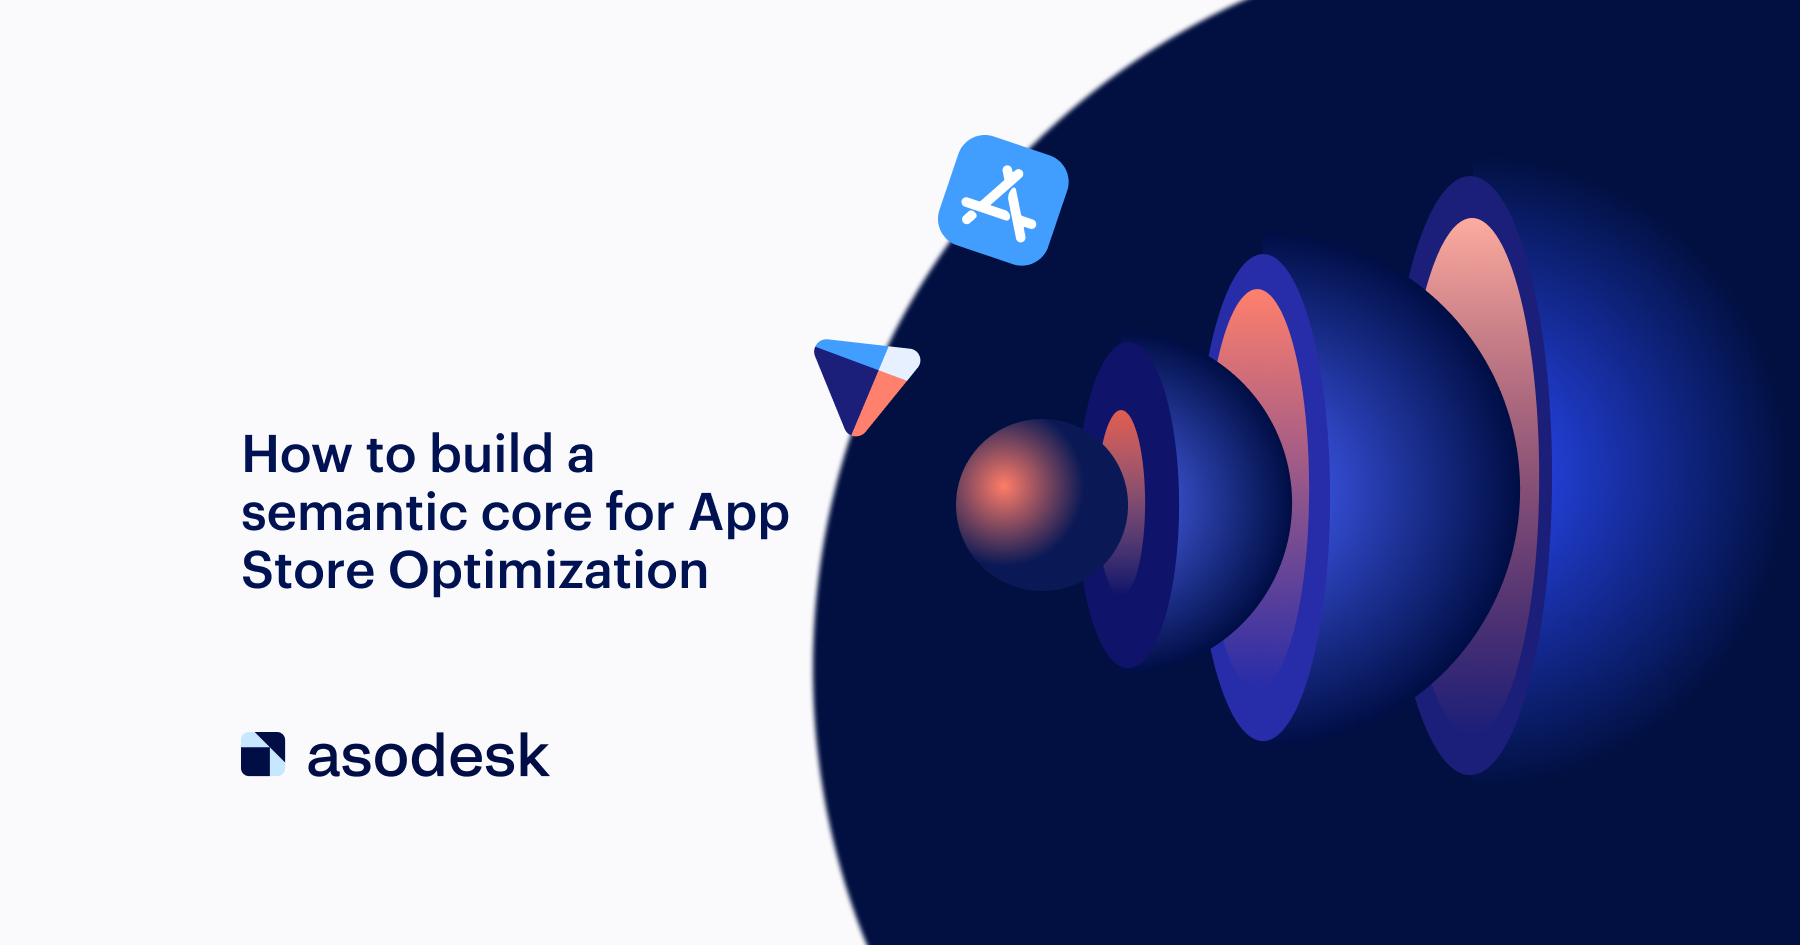 How to build a semantic core for App Store Optimization